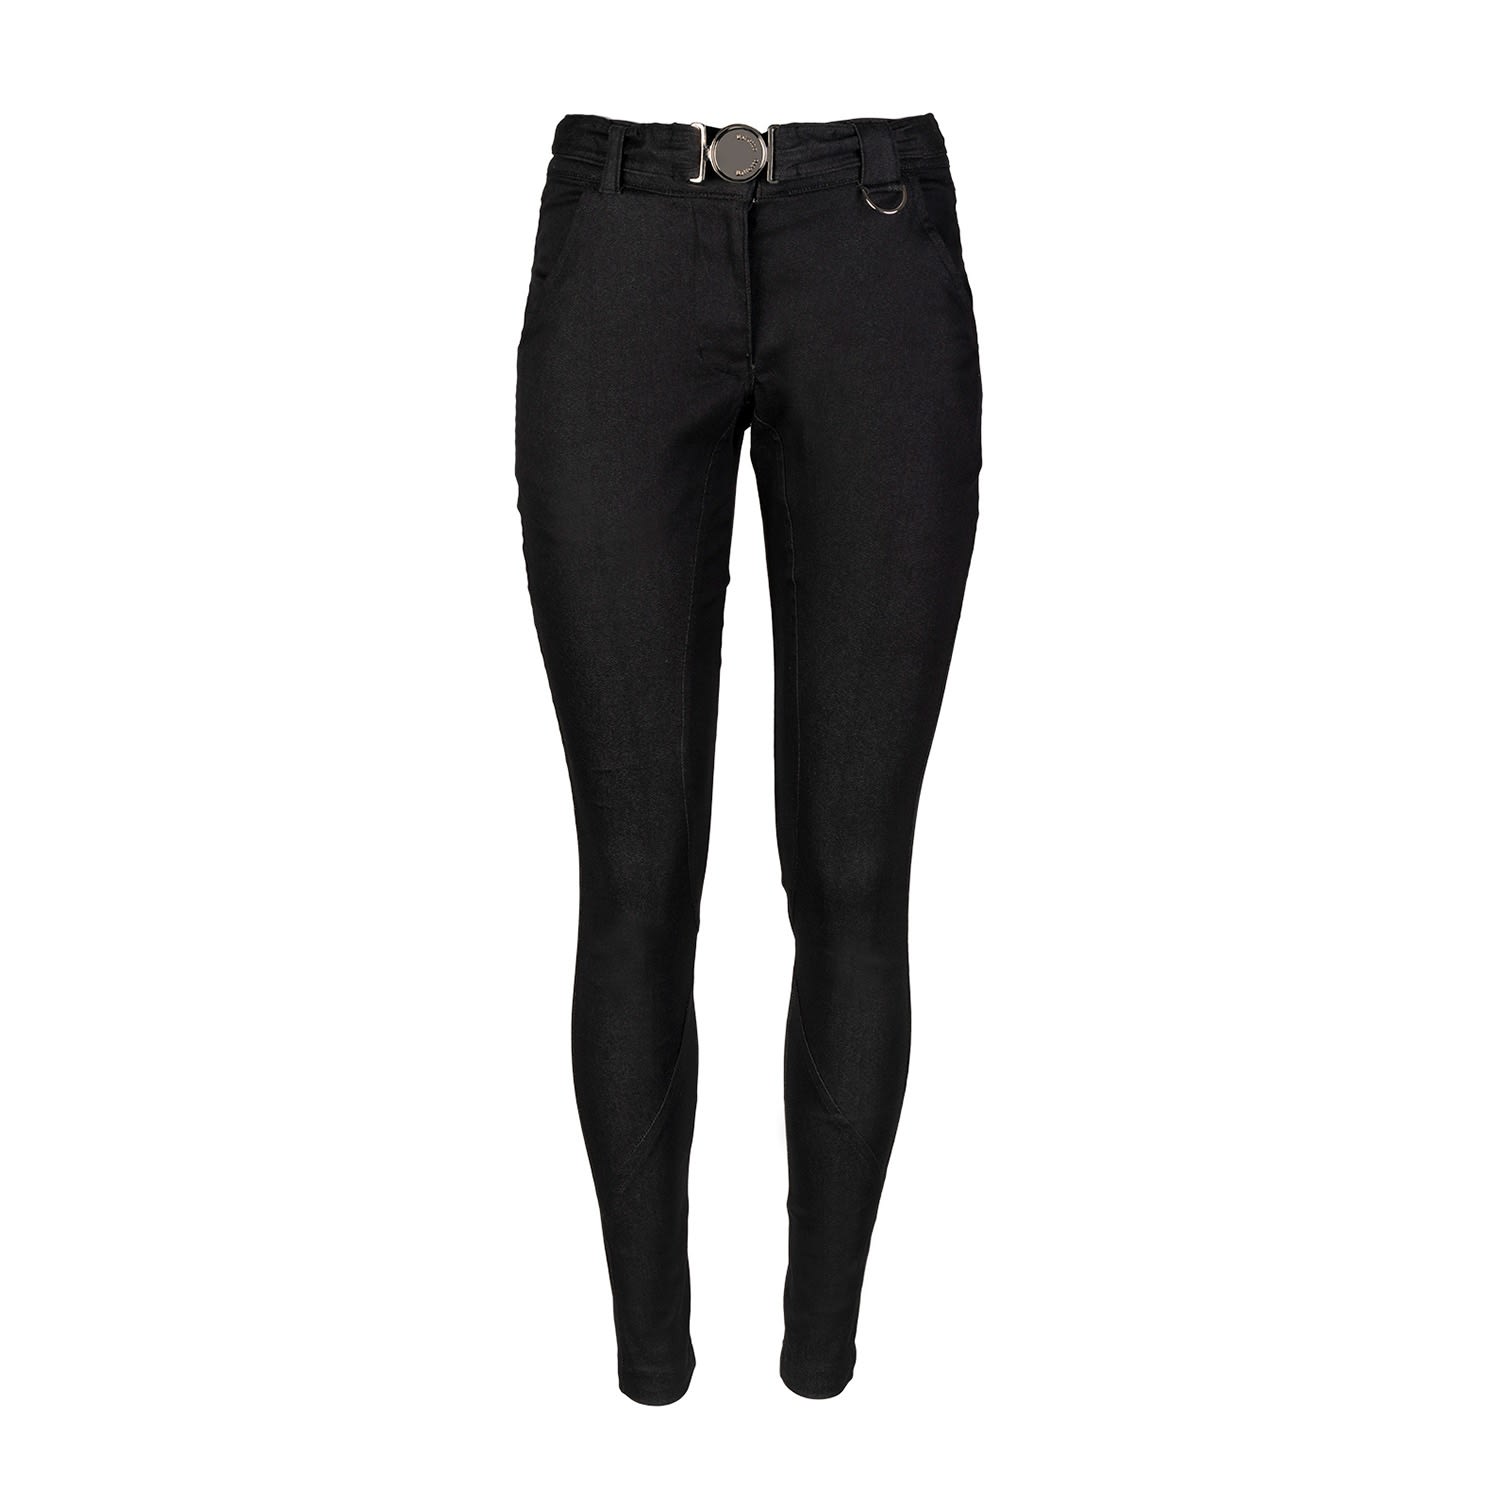 Women’s Breeze Seamed Pants With Belt Nero Black Extra Small Balletto Athleisure Couture